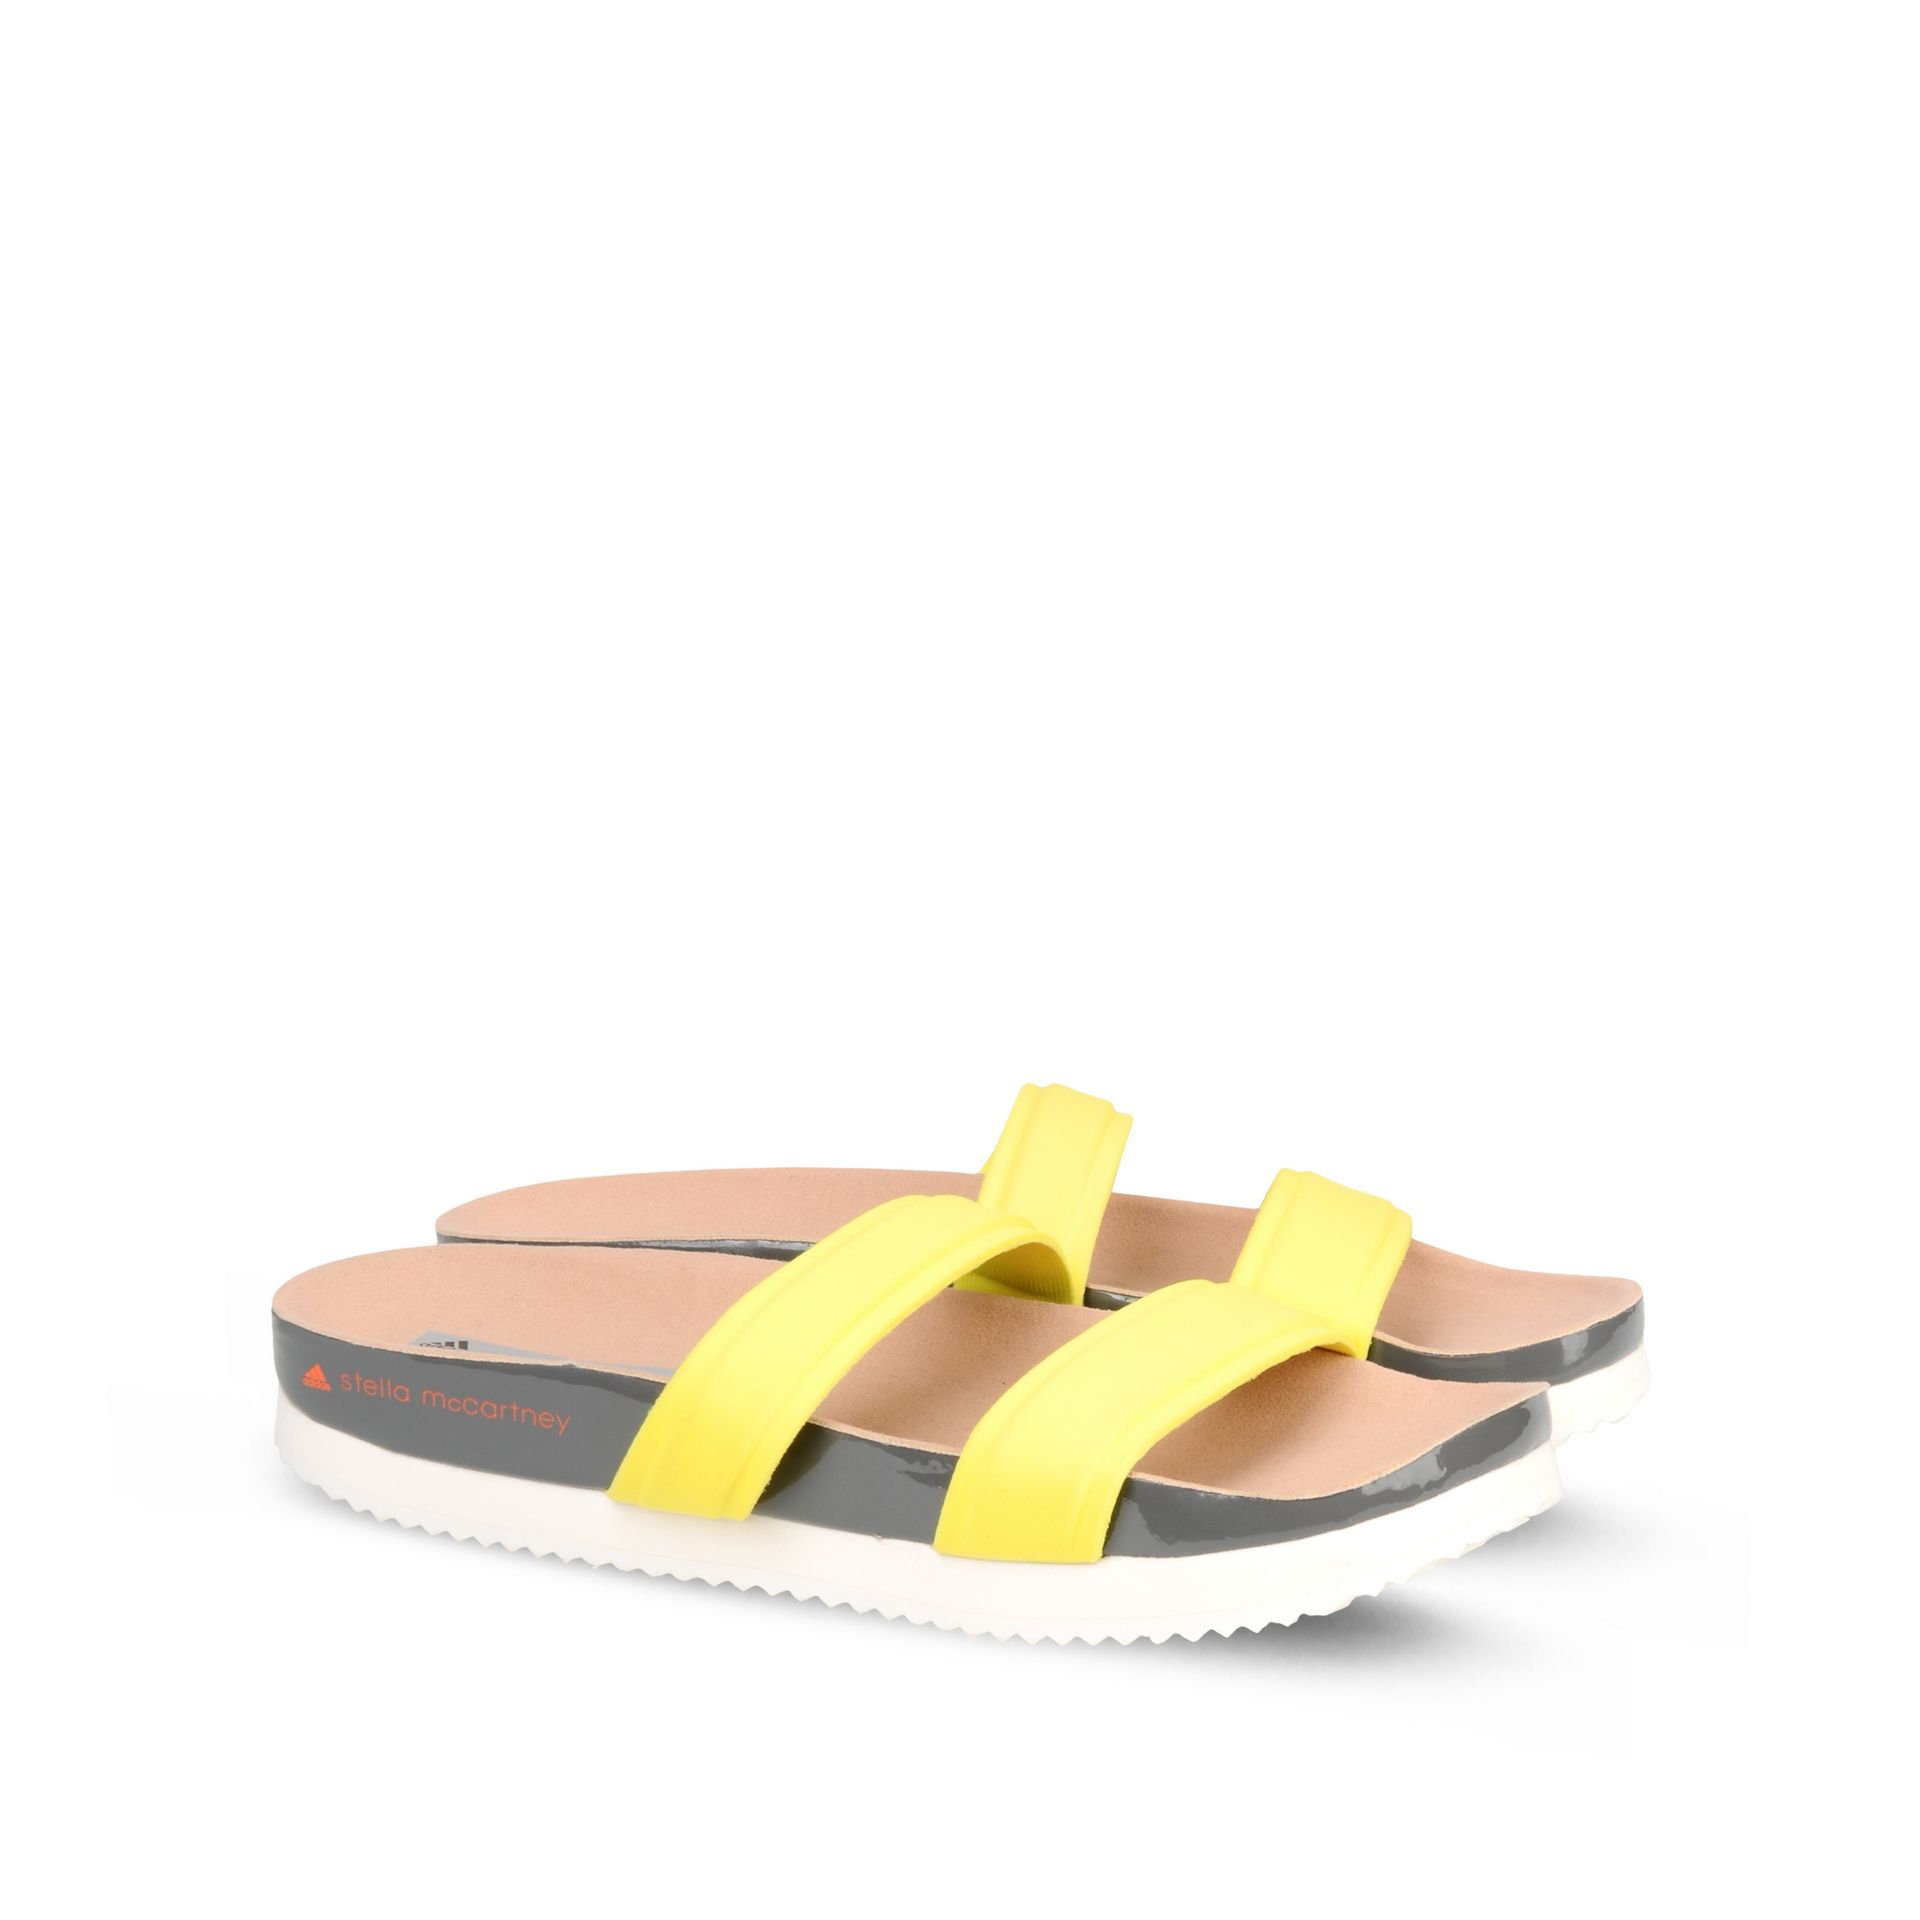 Lyst - Adidas By Stella Mccartney Yellow Diadophis Sandals in Yellow